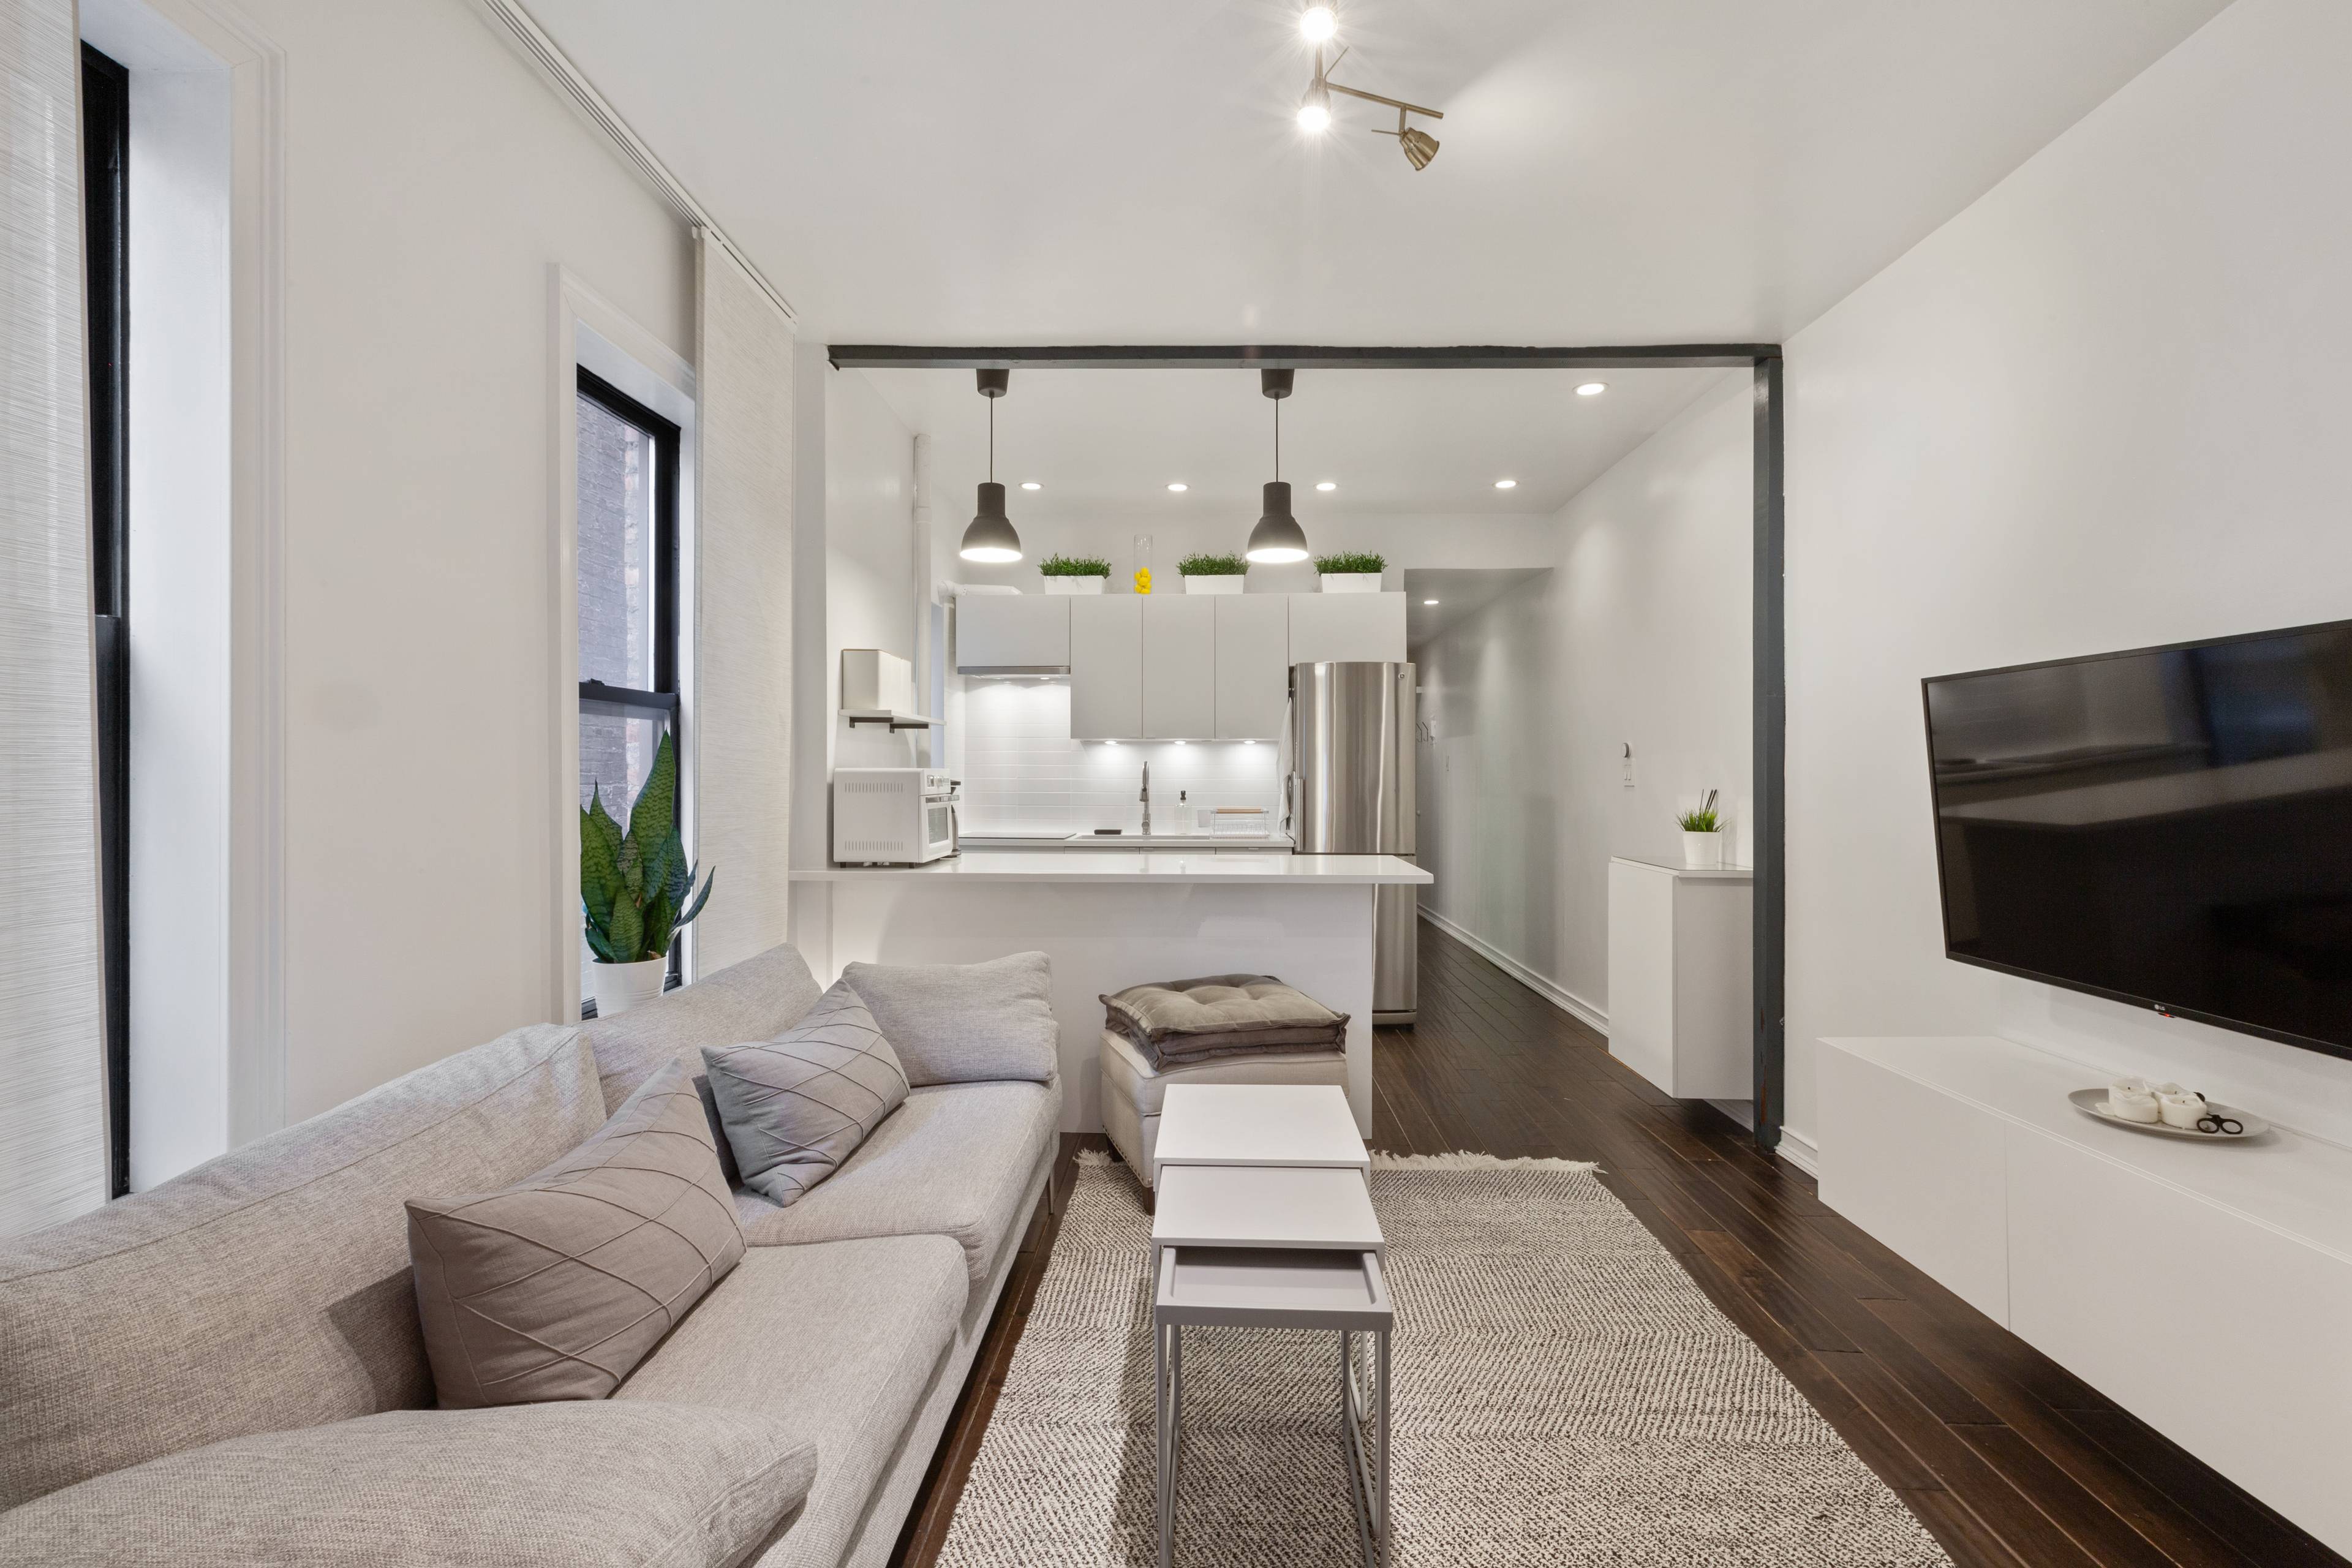 Enjoy luxury living in Brooklyn's most sought after neighborhood in this beautifully renovated two bedroom, one bathroom HDFC co op featuring sleek designer interiors and an outstanding Williamsburg location.